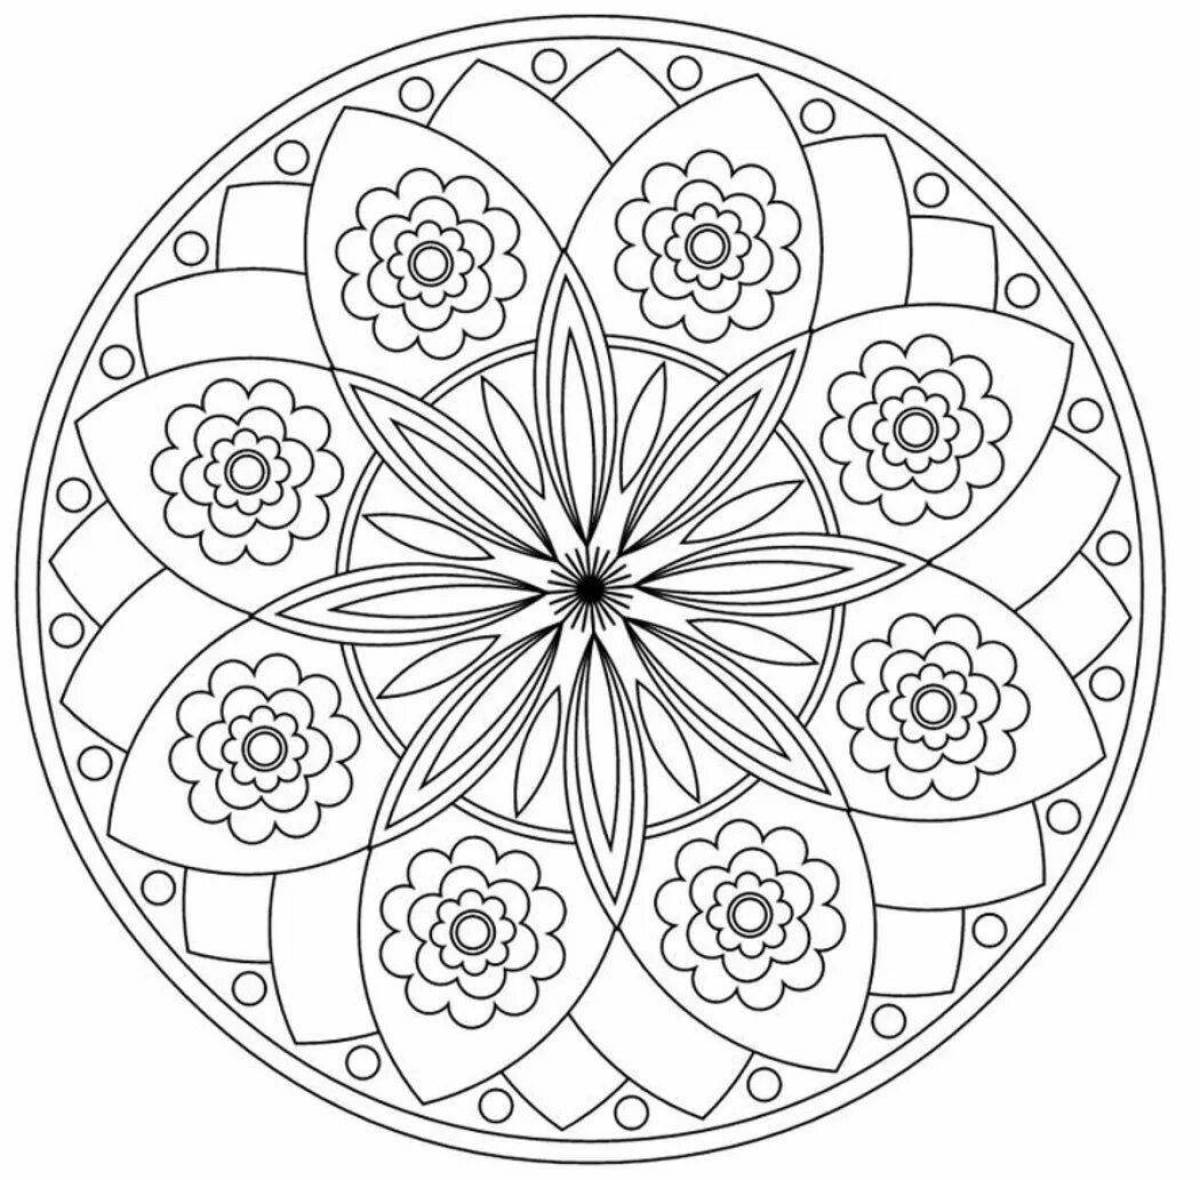 Joyful mandala coloring pages for kids 5-6 years old